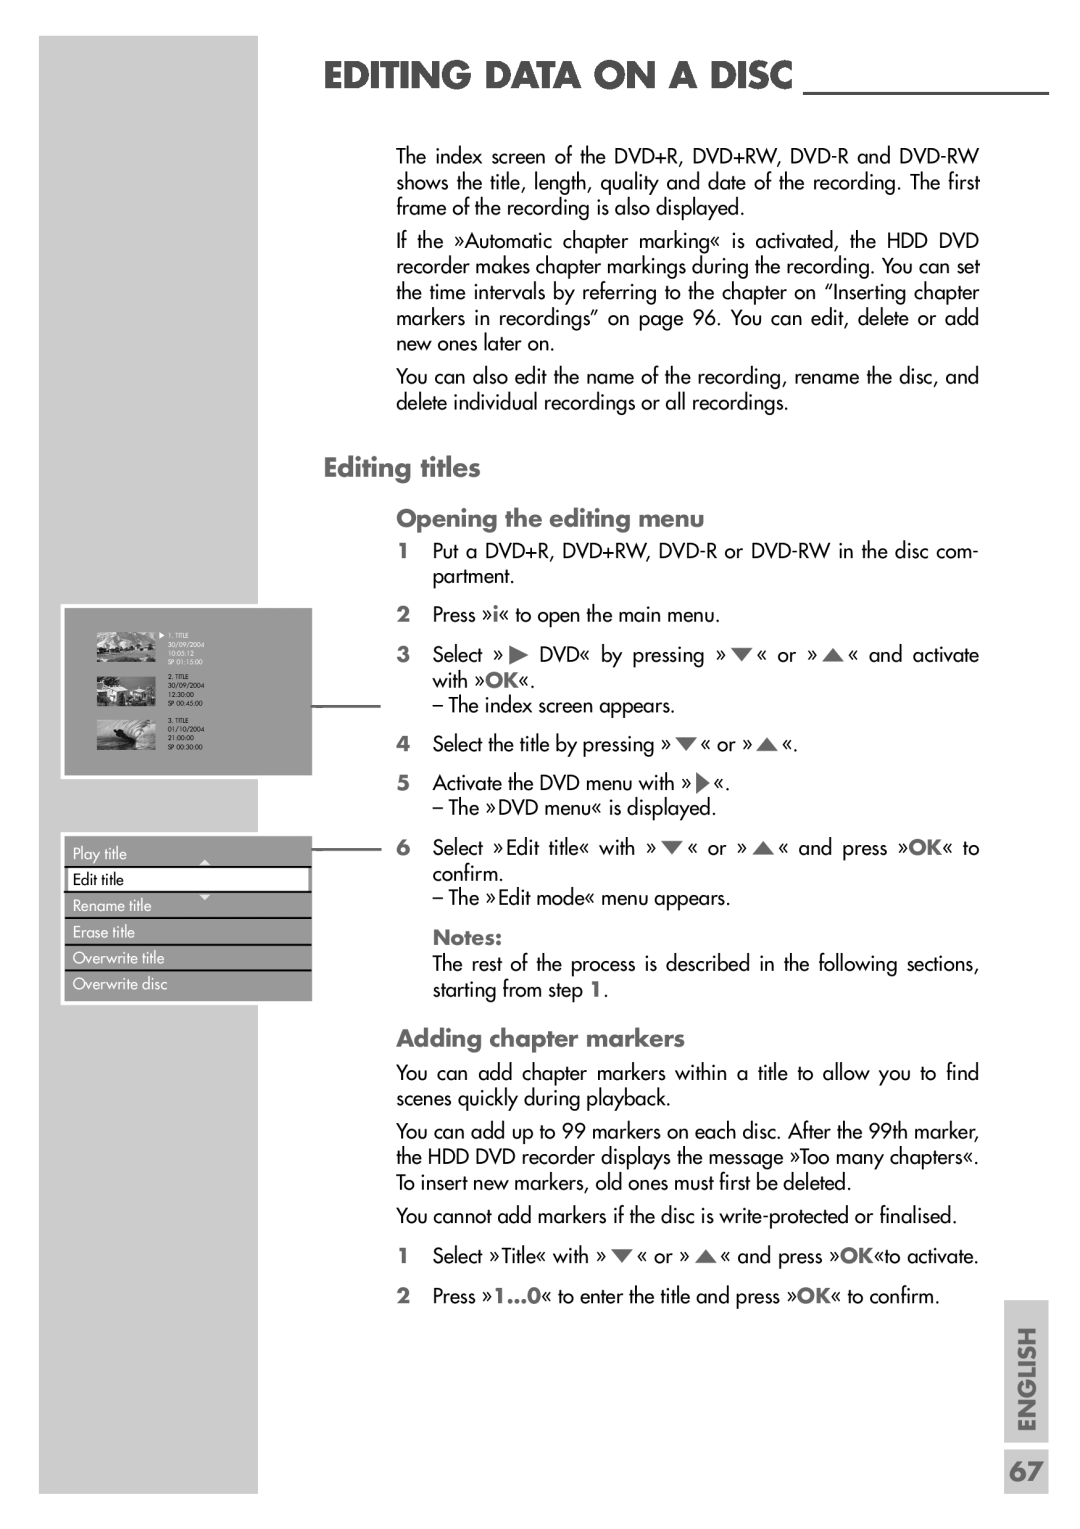 Grundig 5550 HDD manual Editing Data On A Disc, Editing titles, Opening the editing menu, Adding chapter markers, English 